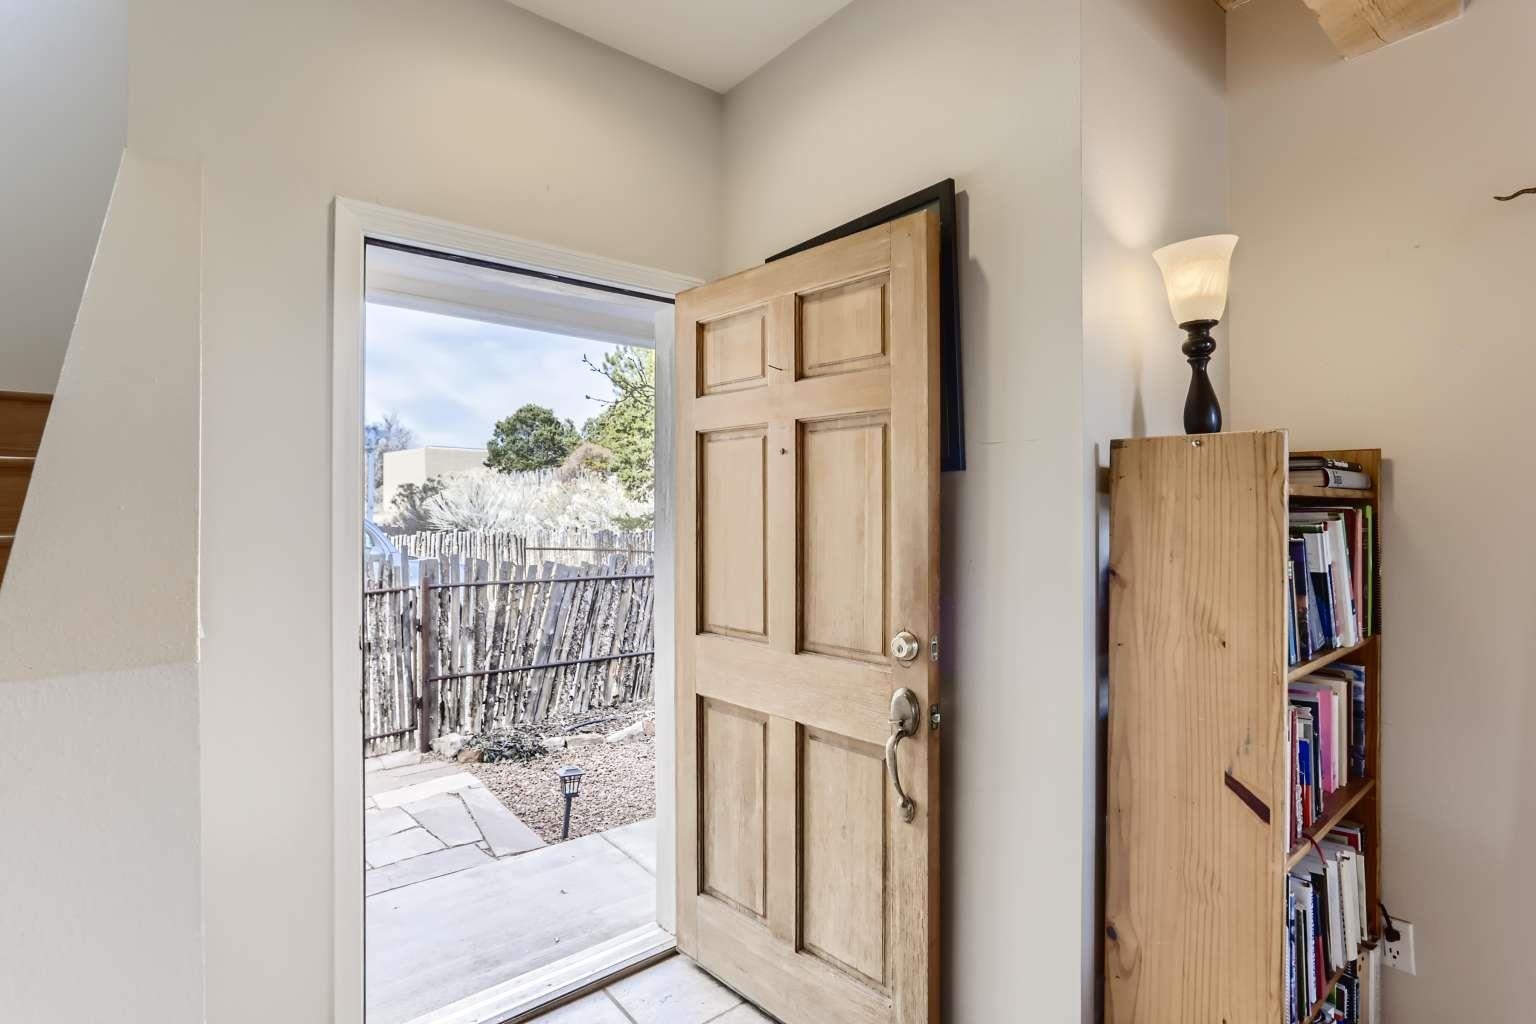 4129 WHISPERING WING, Santa Fe, New Mexico 87507, 3 Bedrooms Bedrooms, ,2 BathroomsBathrooms,Residential,For Sale,4129 WHISPERING WING,202201231